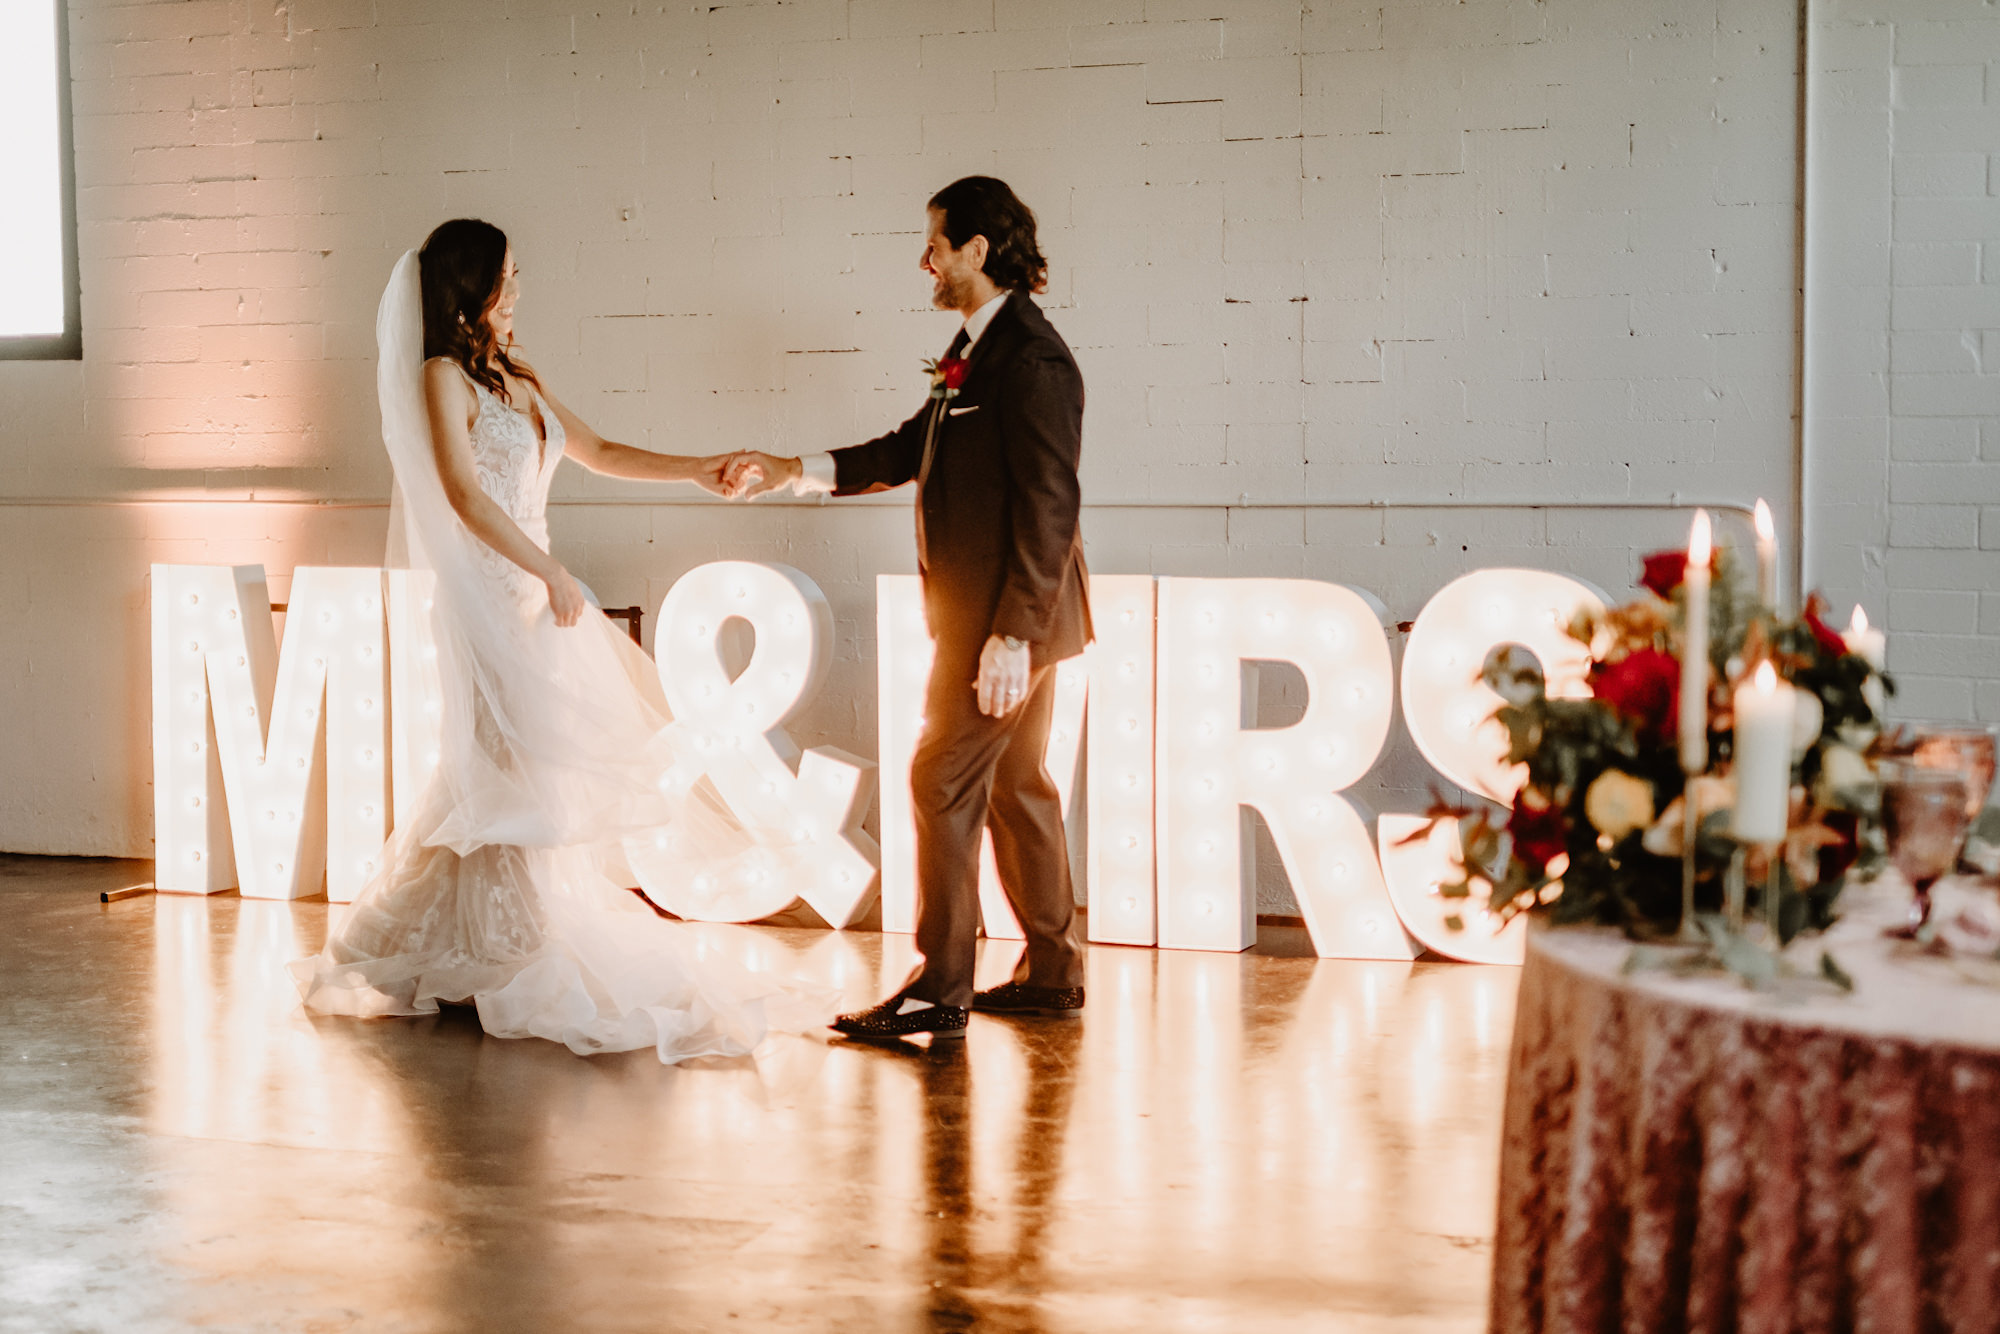 Large Light Up Mr. and Mrs. Letters | Fun Modern Reception Decor Ideas | Bride and Groom First Dance | Tampa Bay DJ Graingertainment | Alpha Lit Tampa